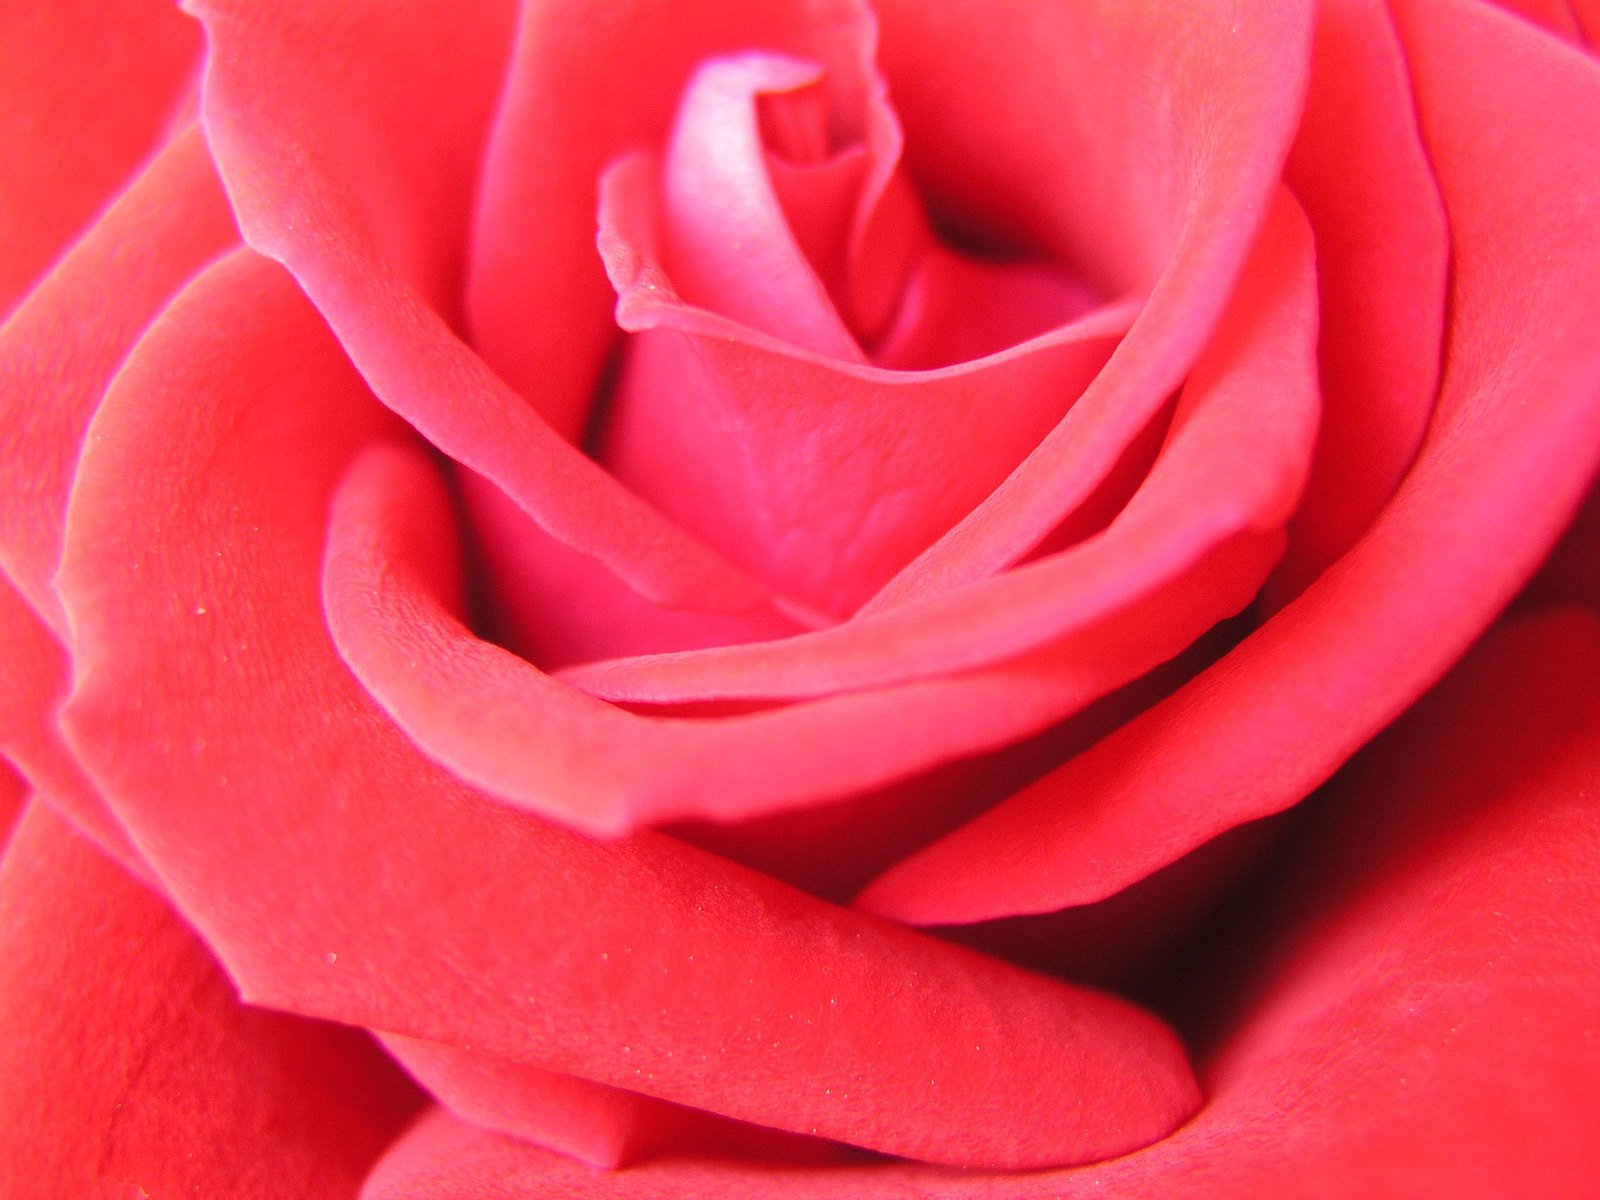 a close up view of a pink rose flower